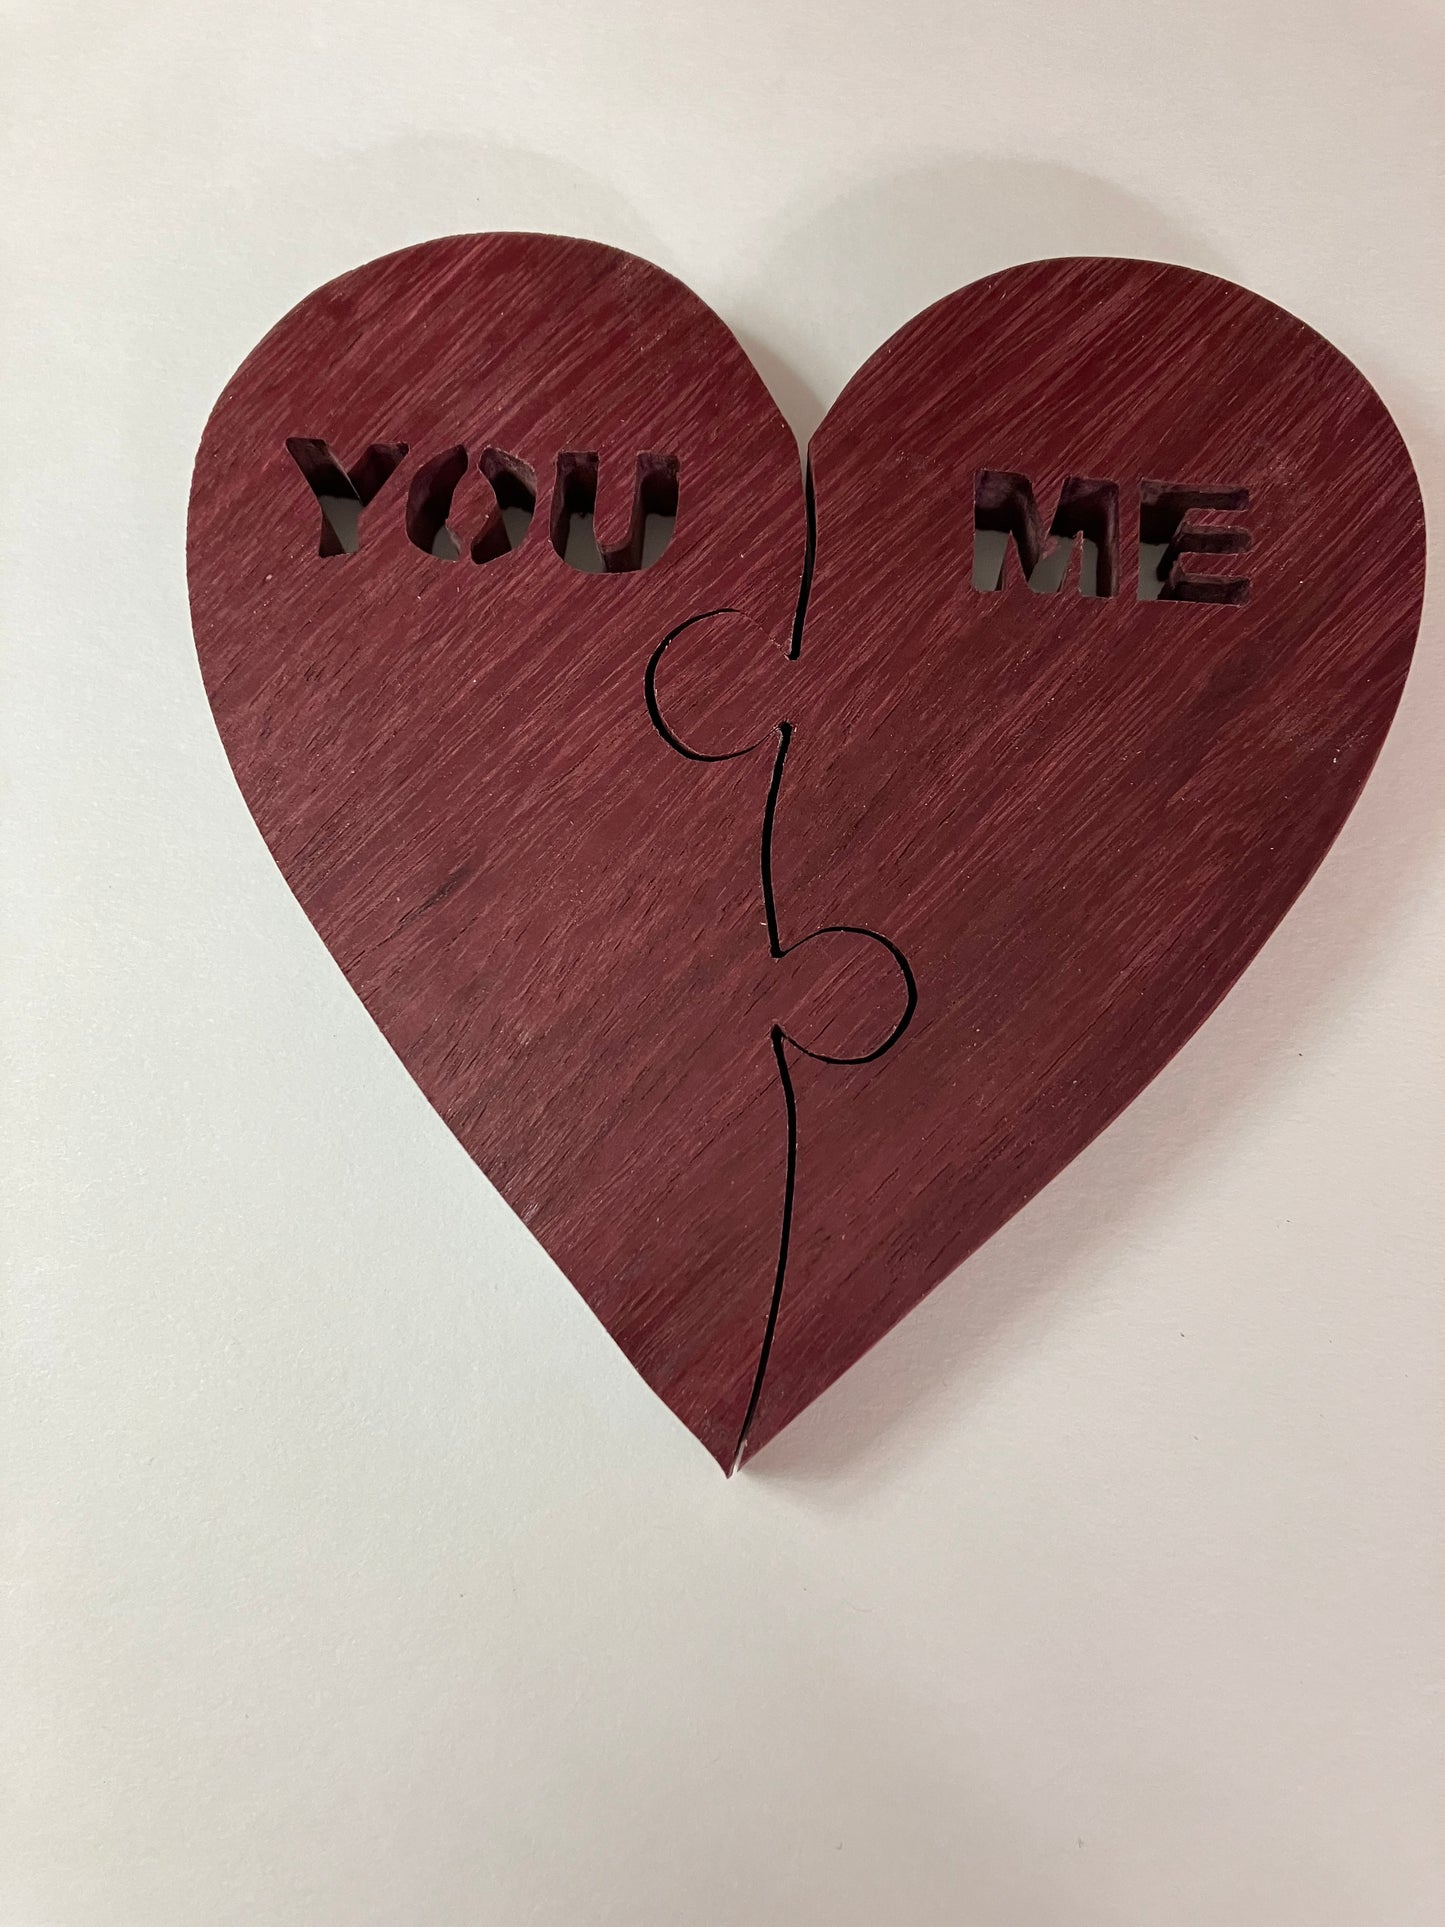 You/me heart puzzle made from purpleheart wood